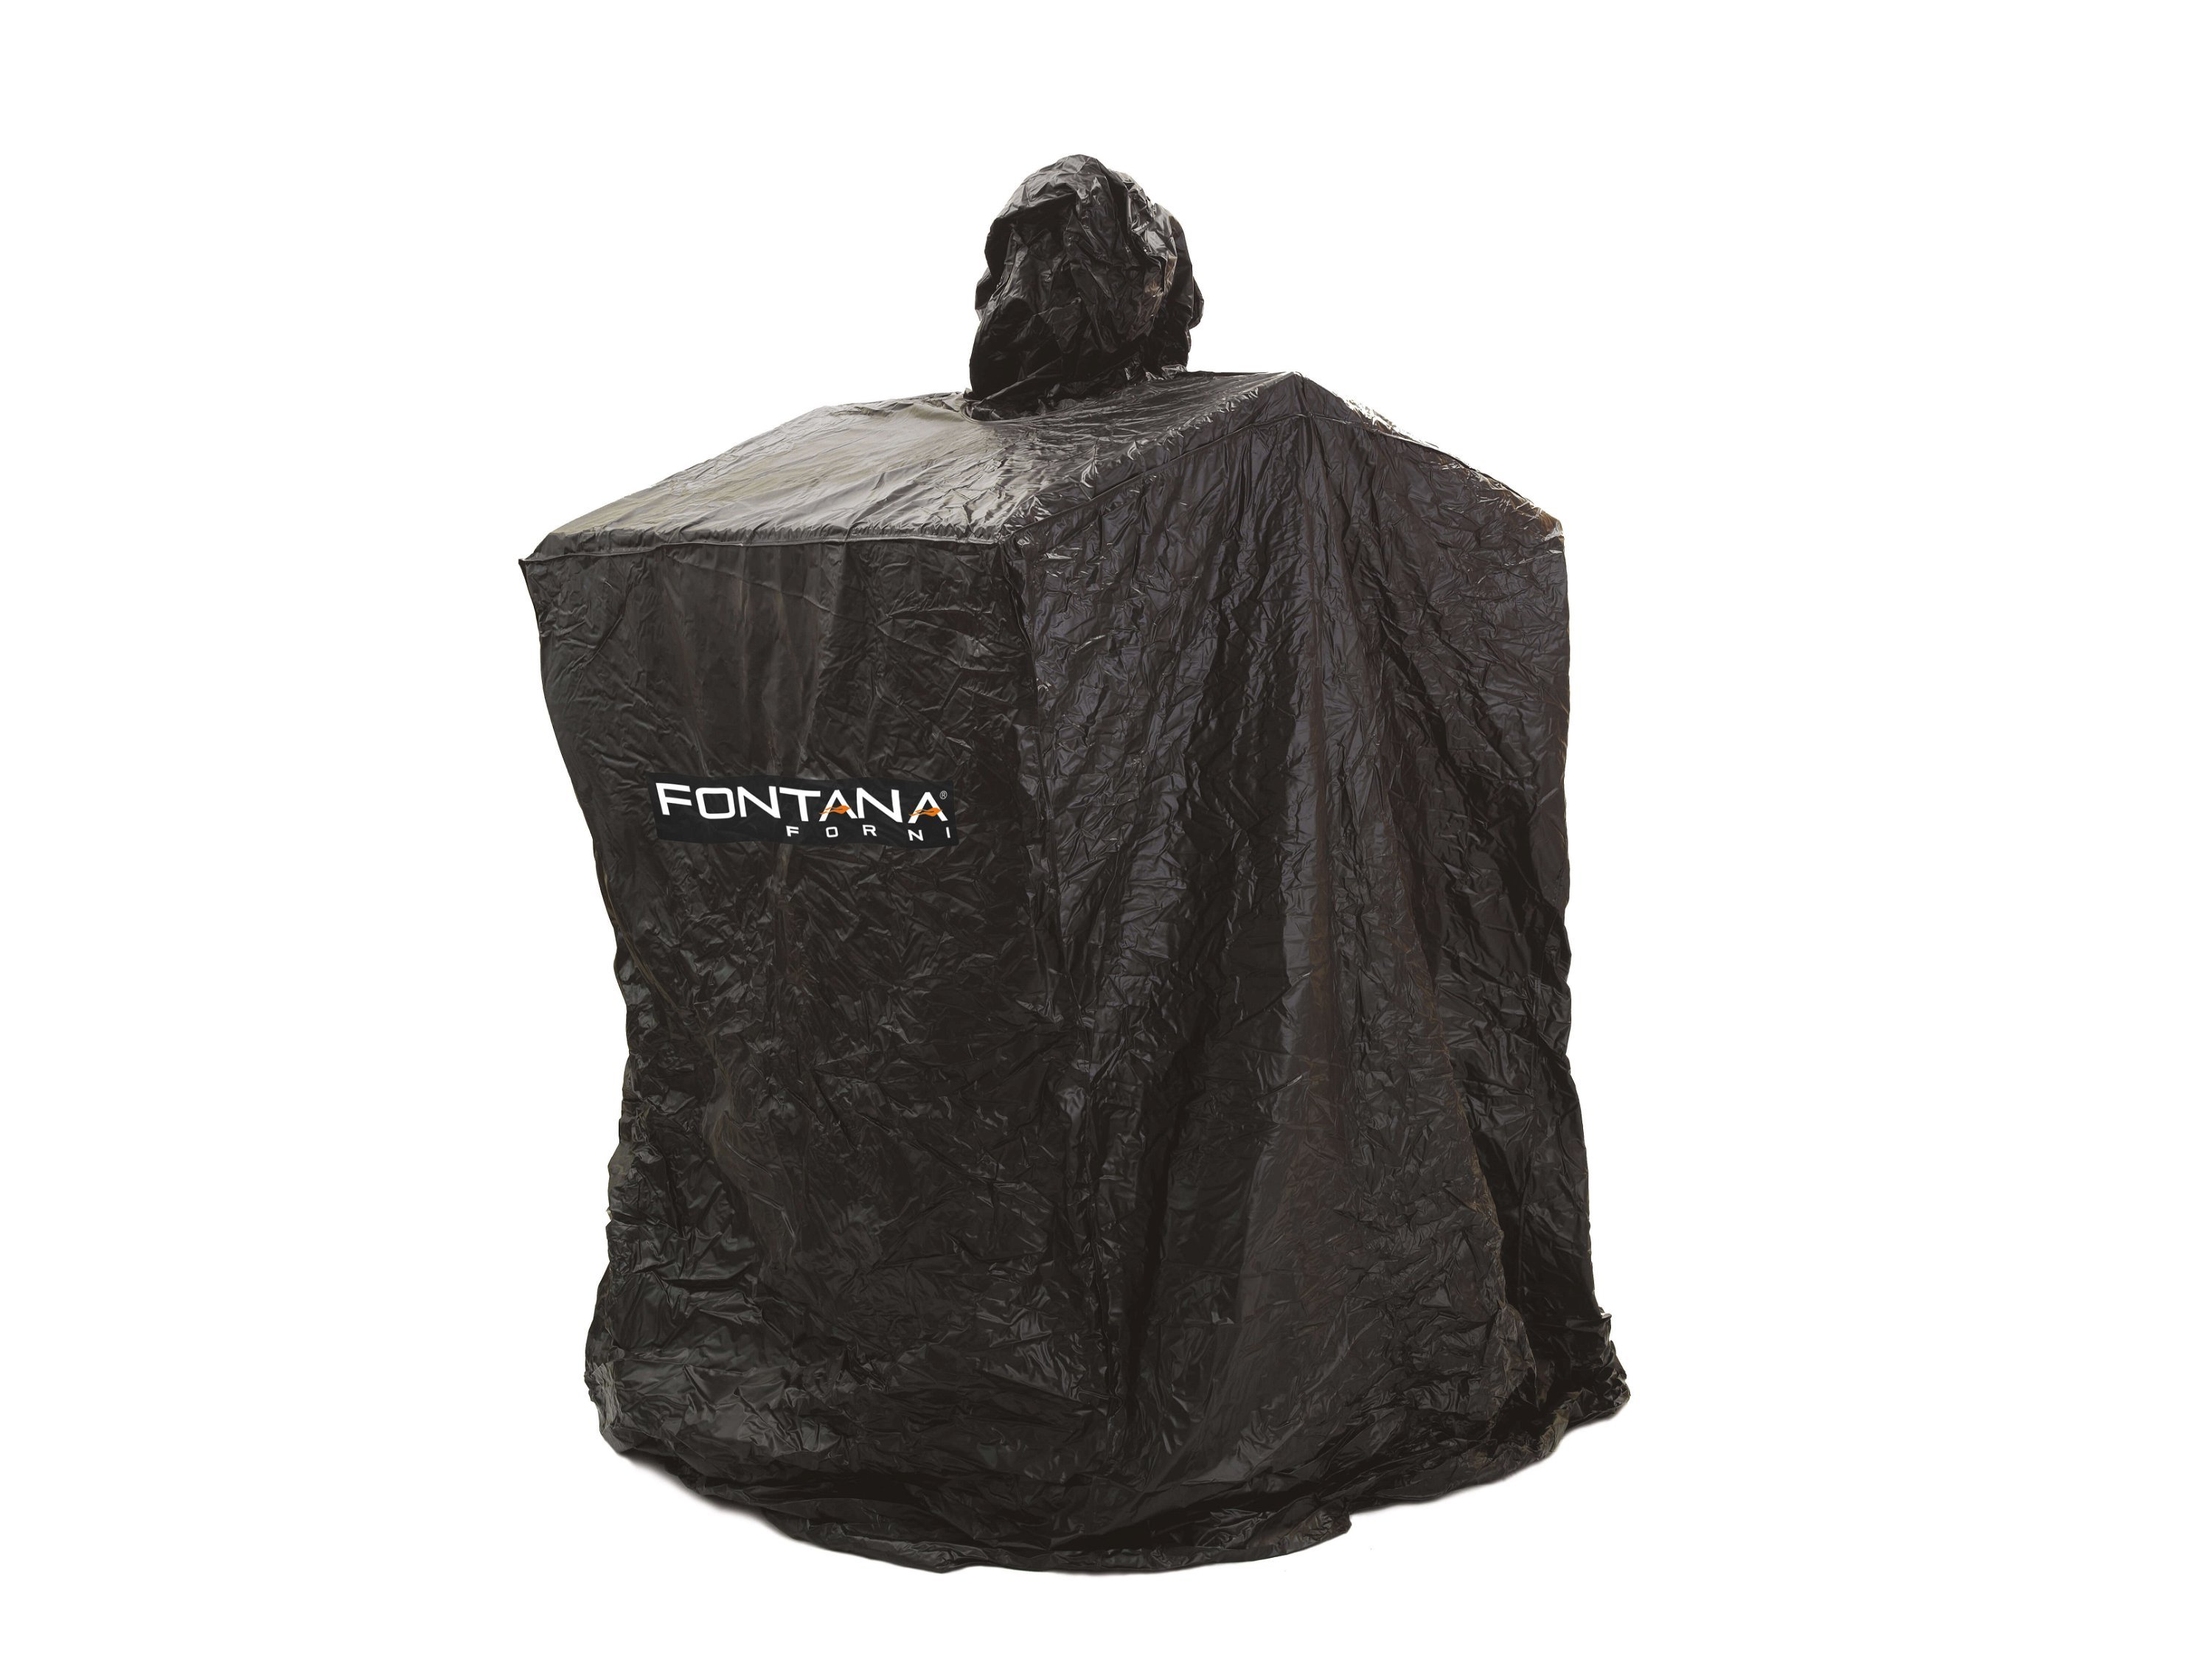 Fontana protective cover for pizza ovens